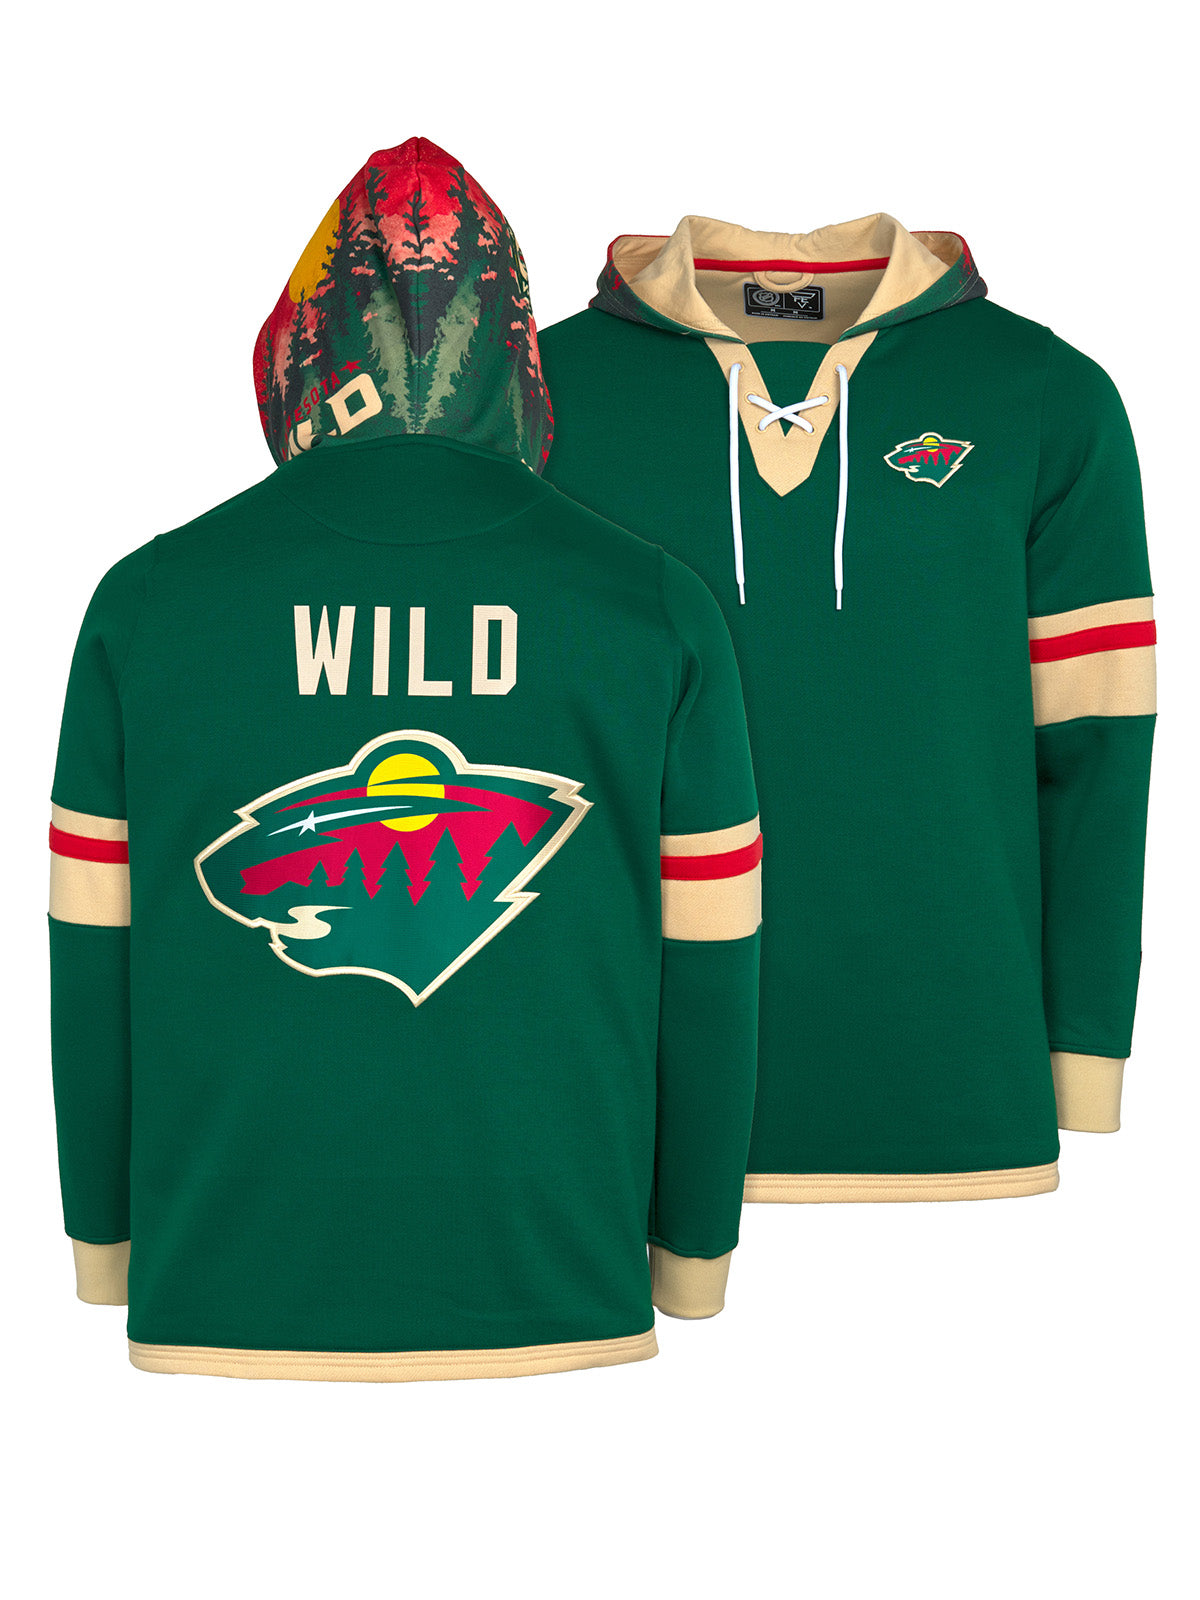 Minnesota Wild Lace-Up Hoodie - Hand drawn custom hood designs with all the team colors and craftmanship to replicate the gameday jersey of this NHL hoodie